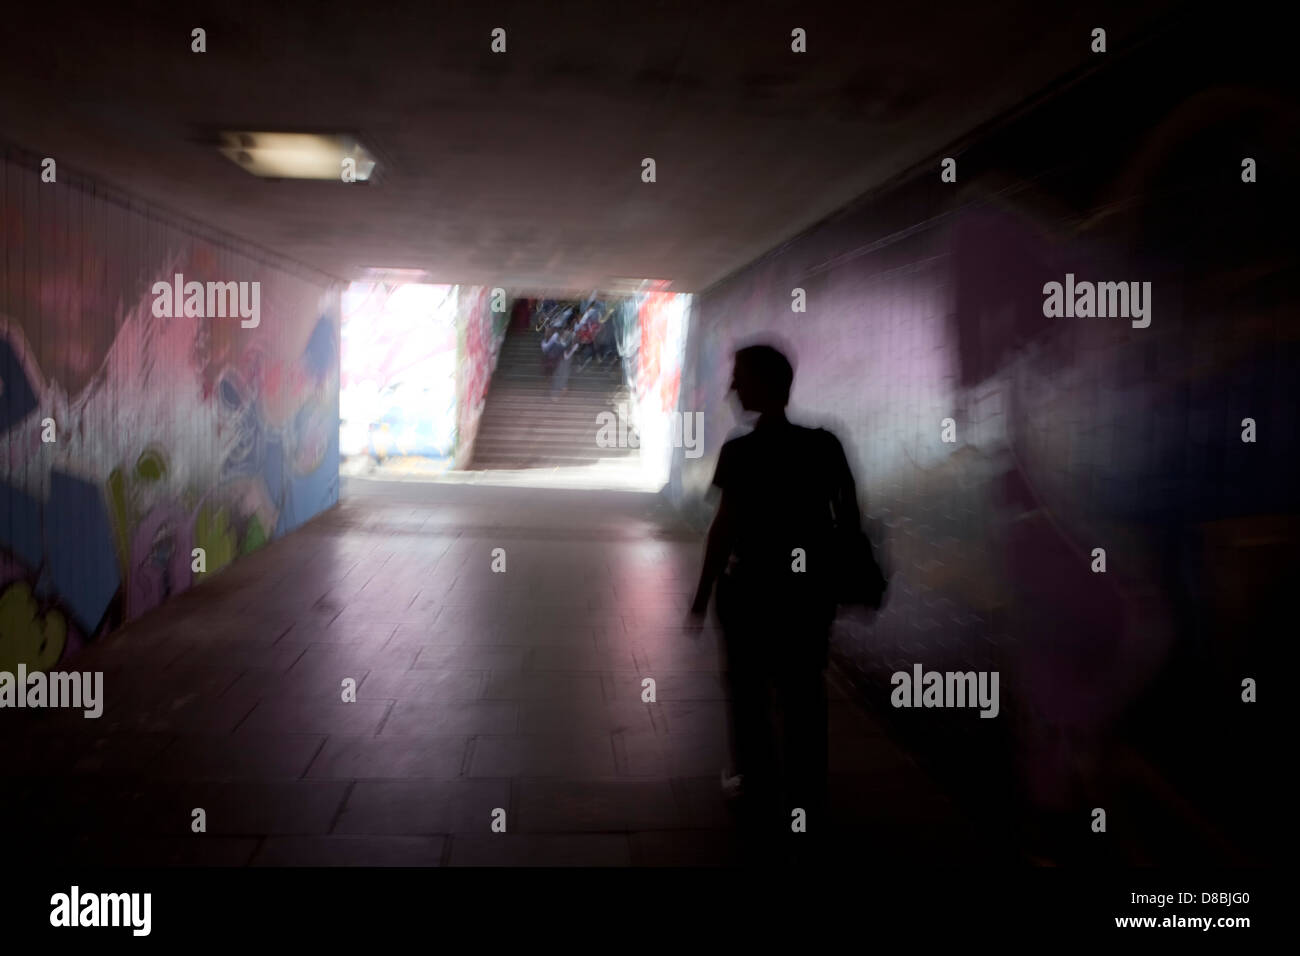 A man walking in a dark tunnel with graffiti, symbolic image for panic, Trier, Rhineland-Palatinate, Germany, Europe Stock Photo